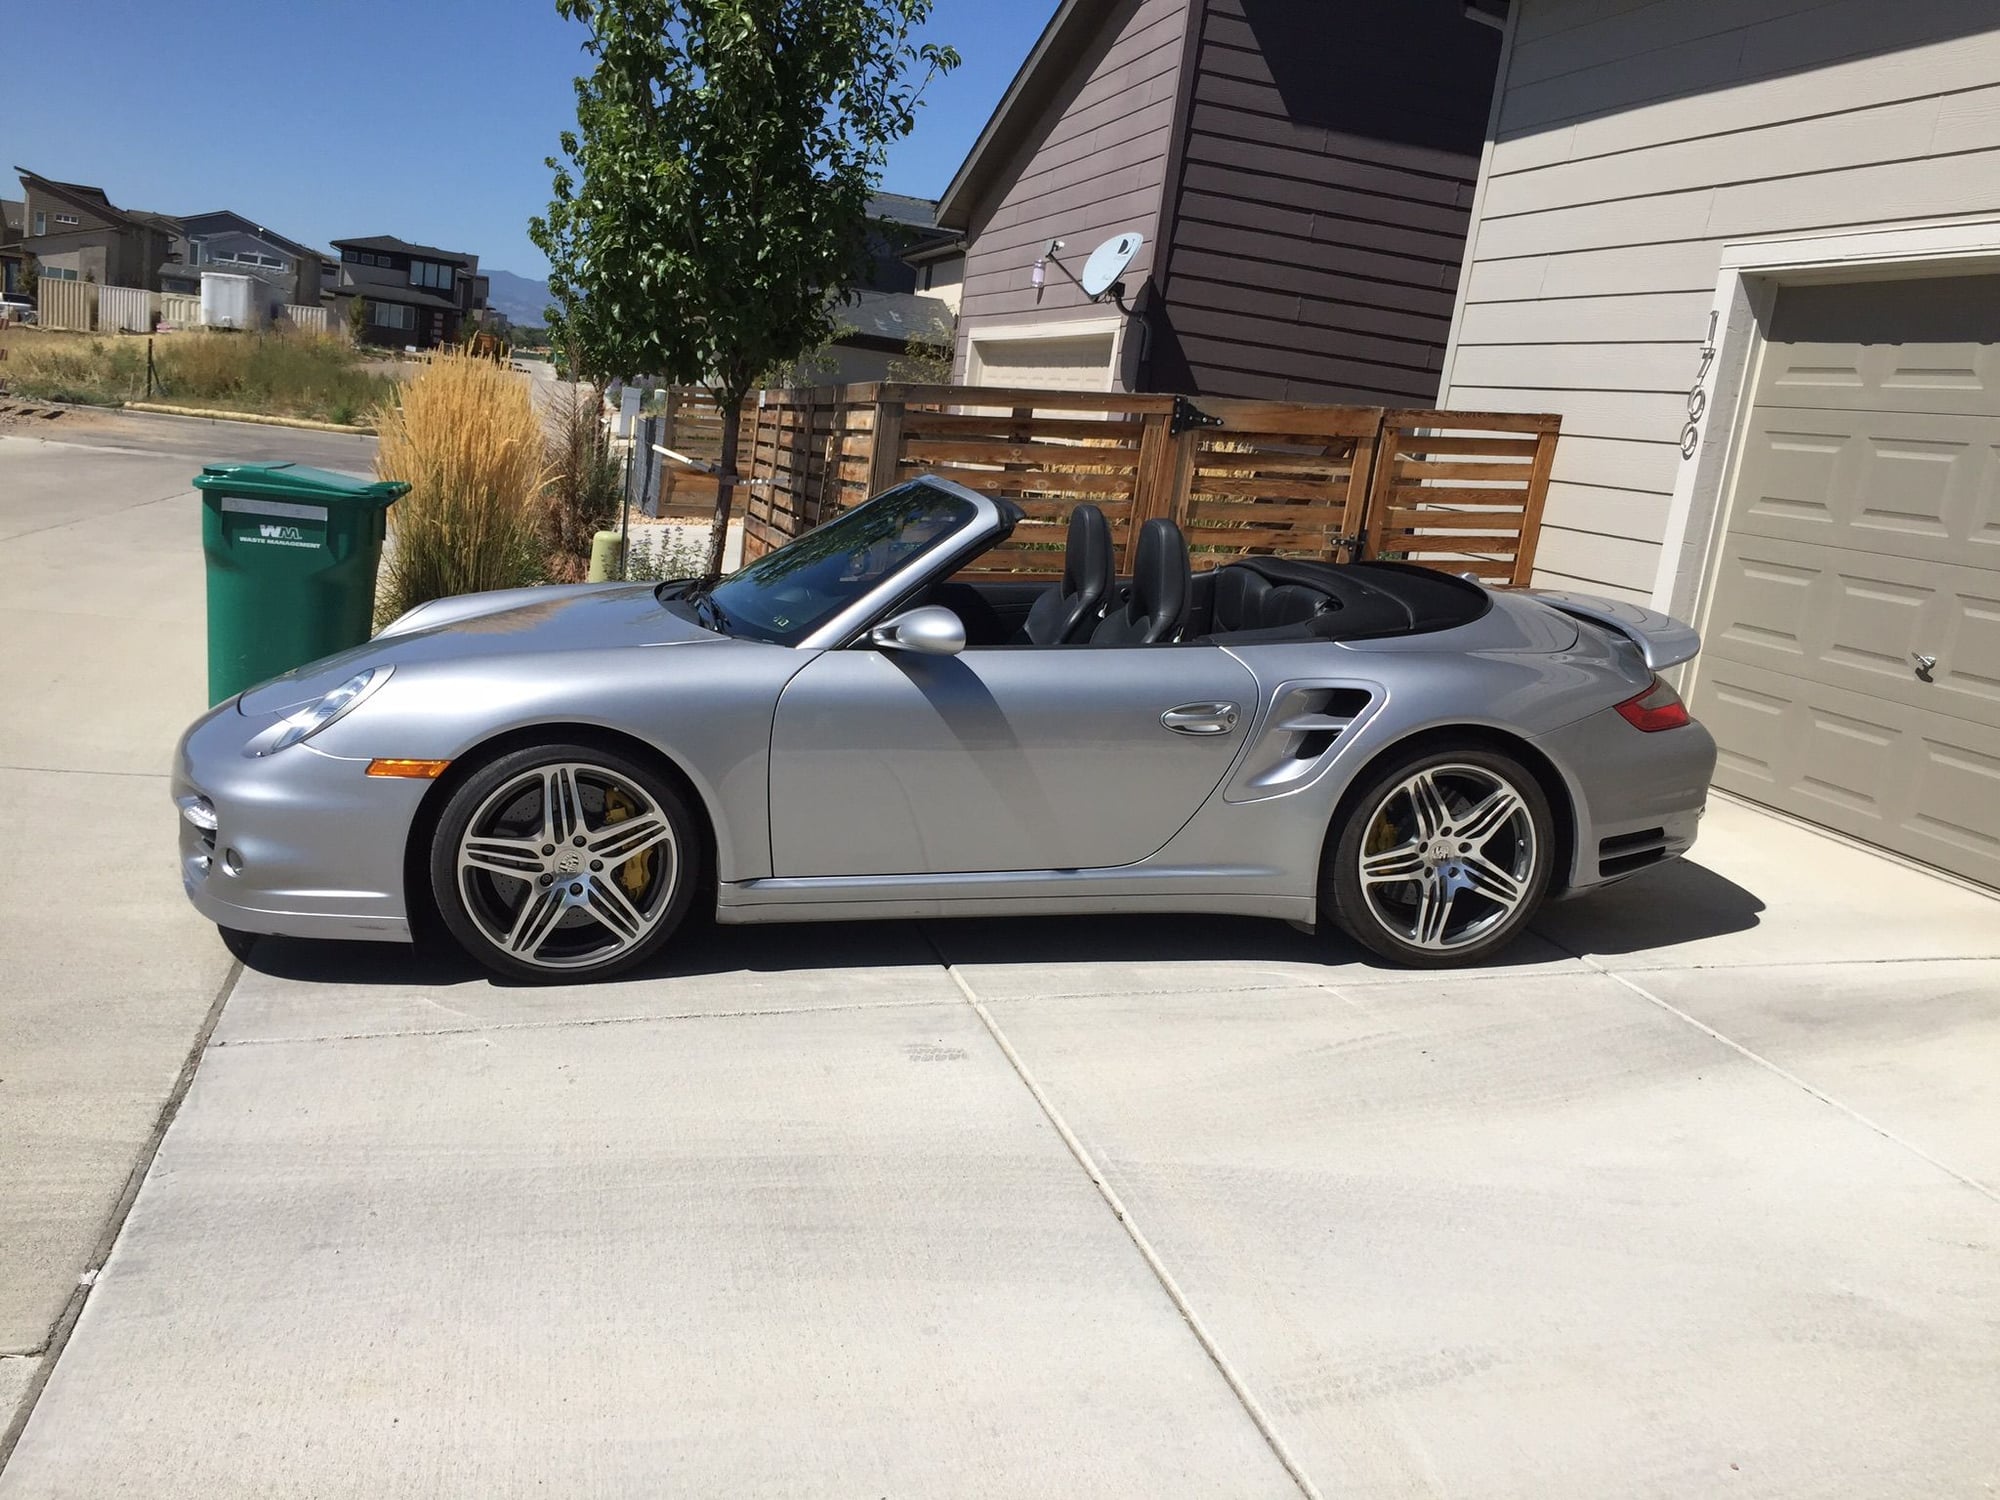 2009 Porsche 911 - 2009 997 911 Turbo cabriolet 6spd manual PCCB with hardtop - Used - VIN WP0CD29939S773366 - 64,000 Miles - 6 cyl - AWD - Manual - Convertible - Silver - Arvada, CO 80007, United States